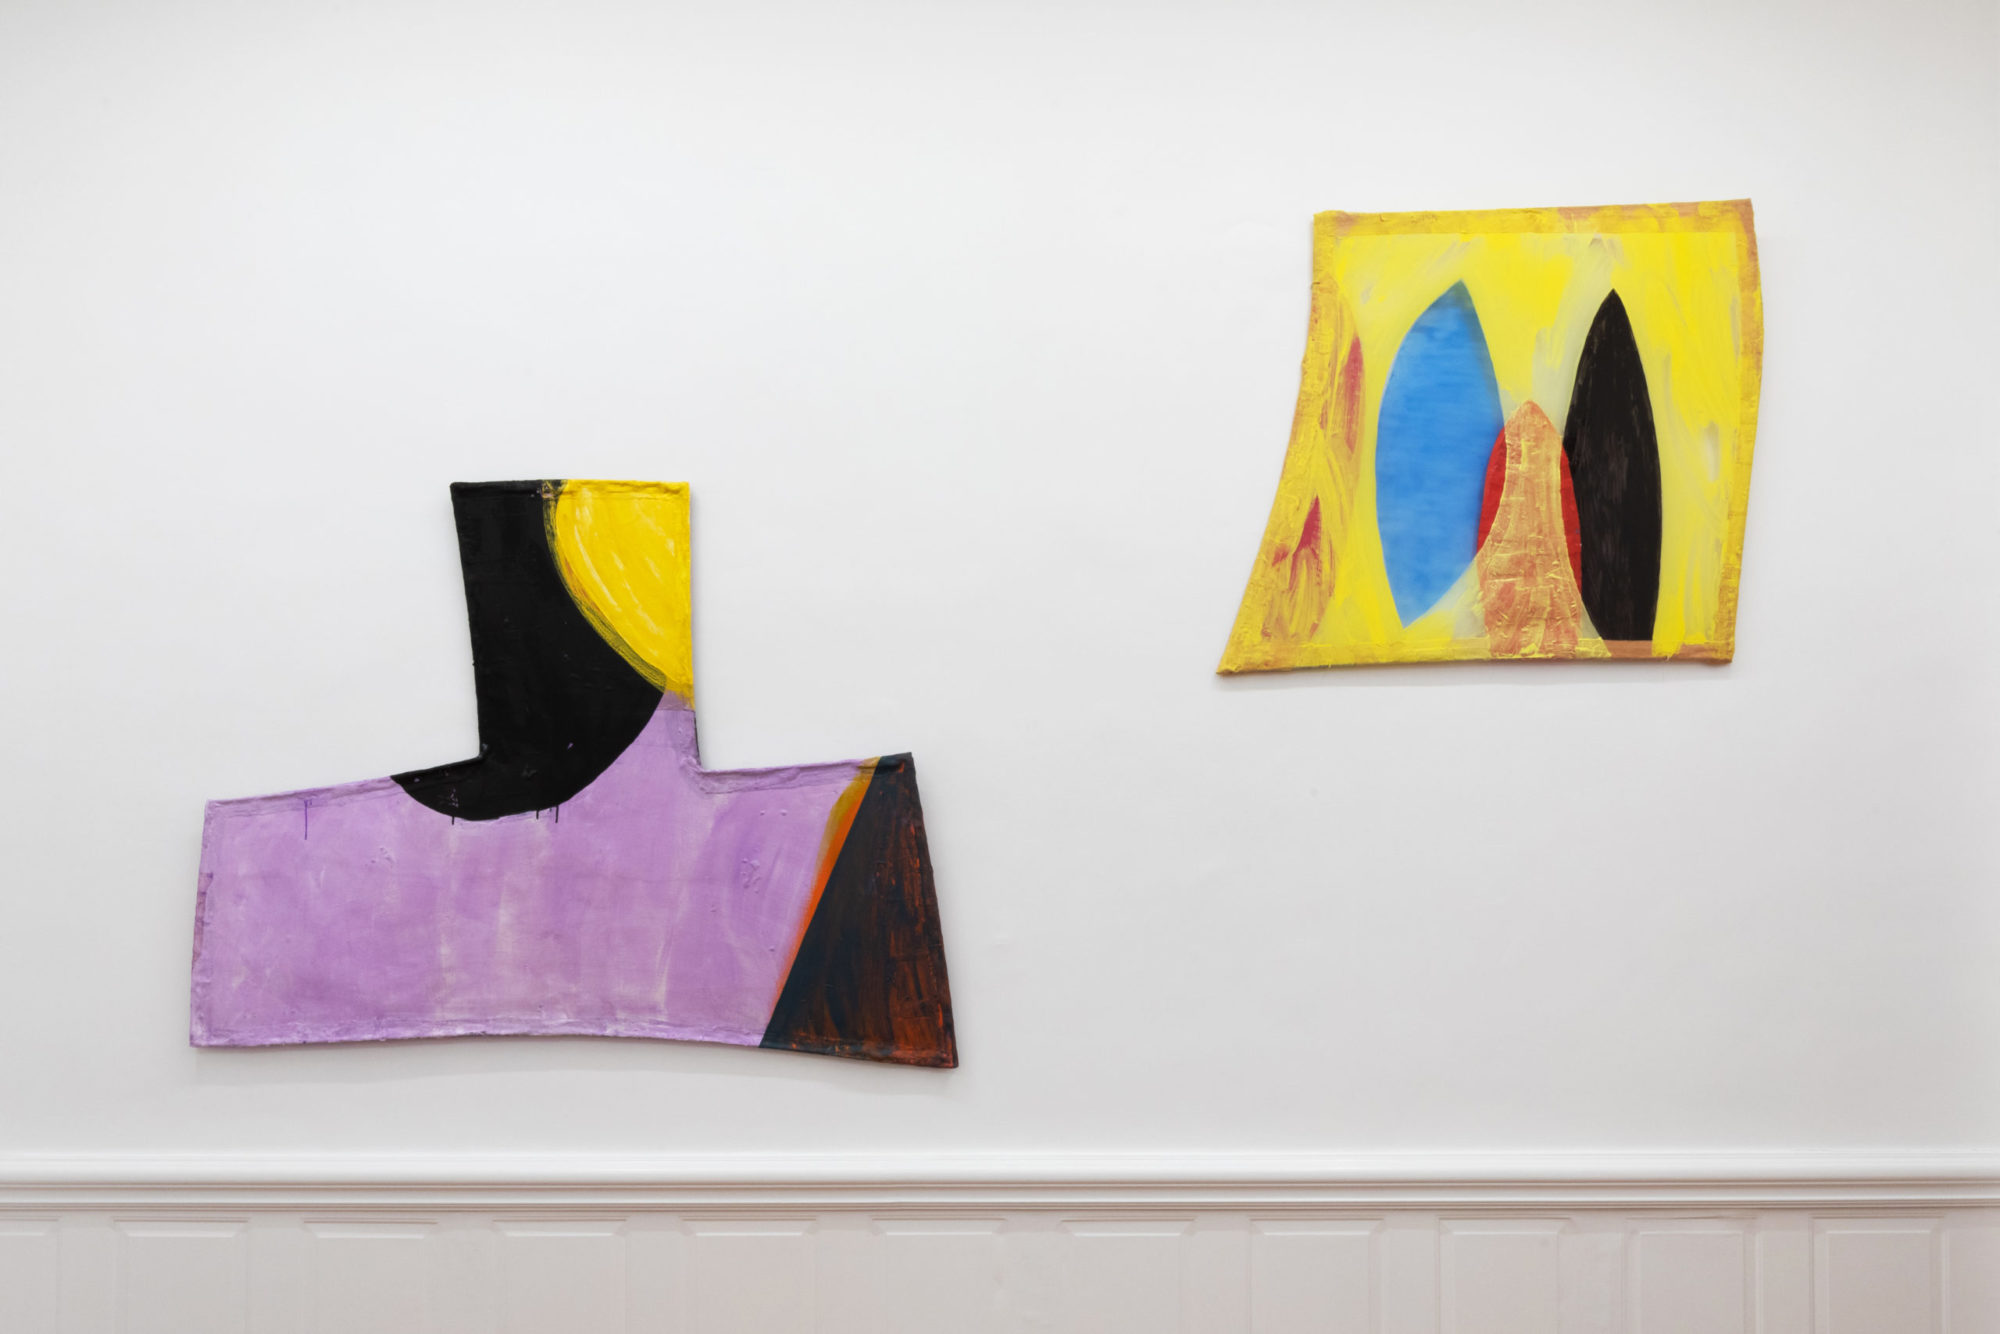 An installation view of Fabienne Lasserre's exhibition at TURN GALLERY in New York. Two pieces are mounted to the wall. They are angular in shape and feature bright purples and yellows.